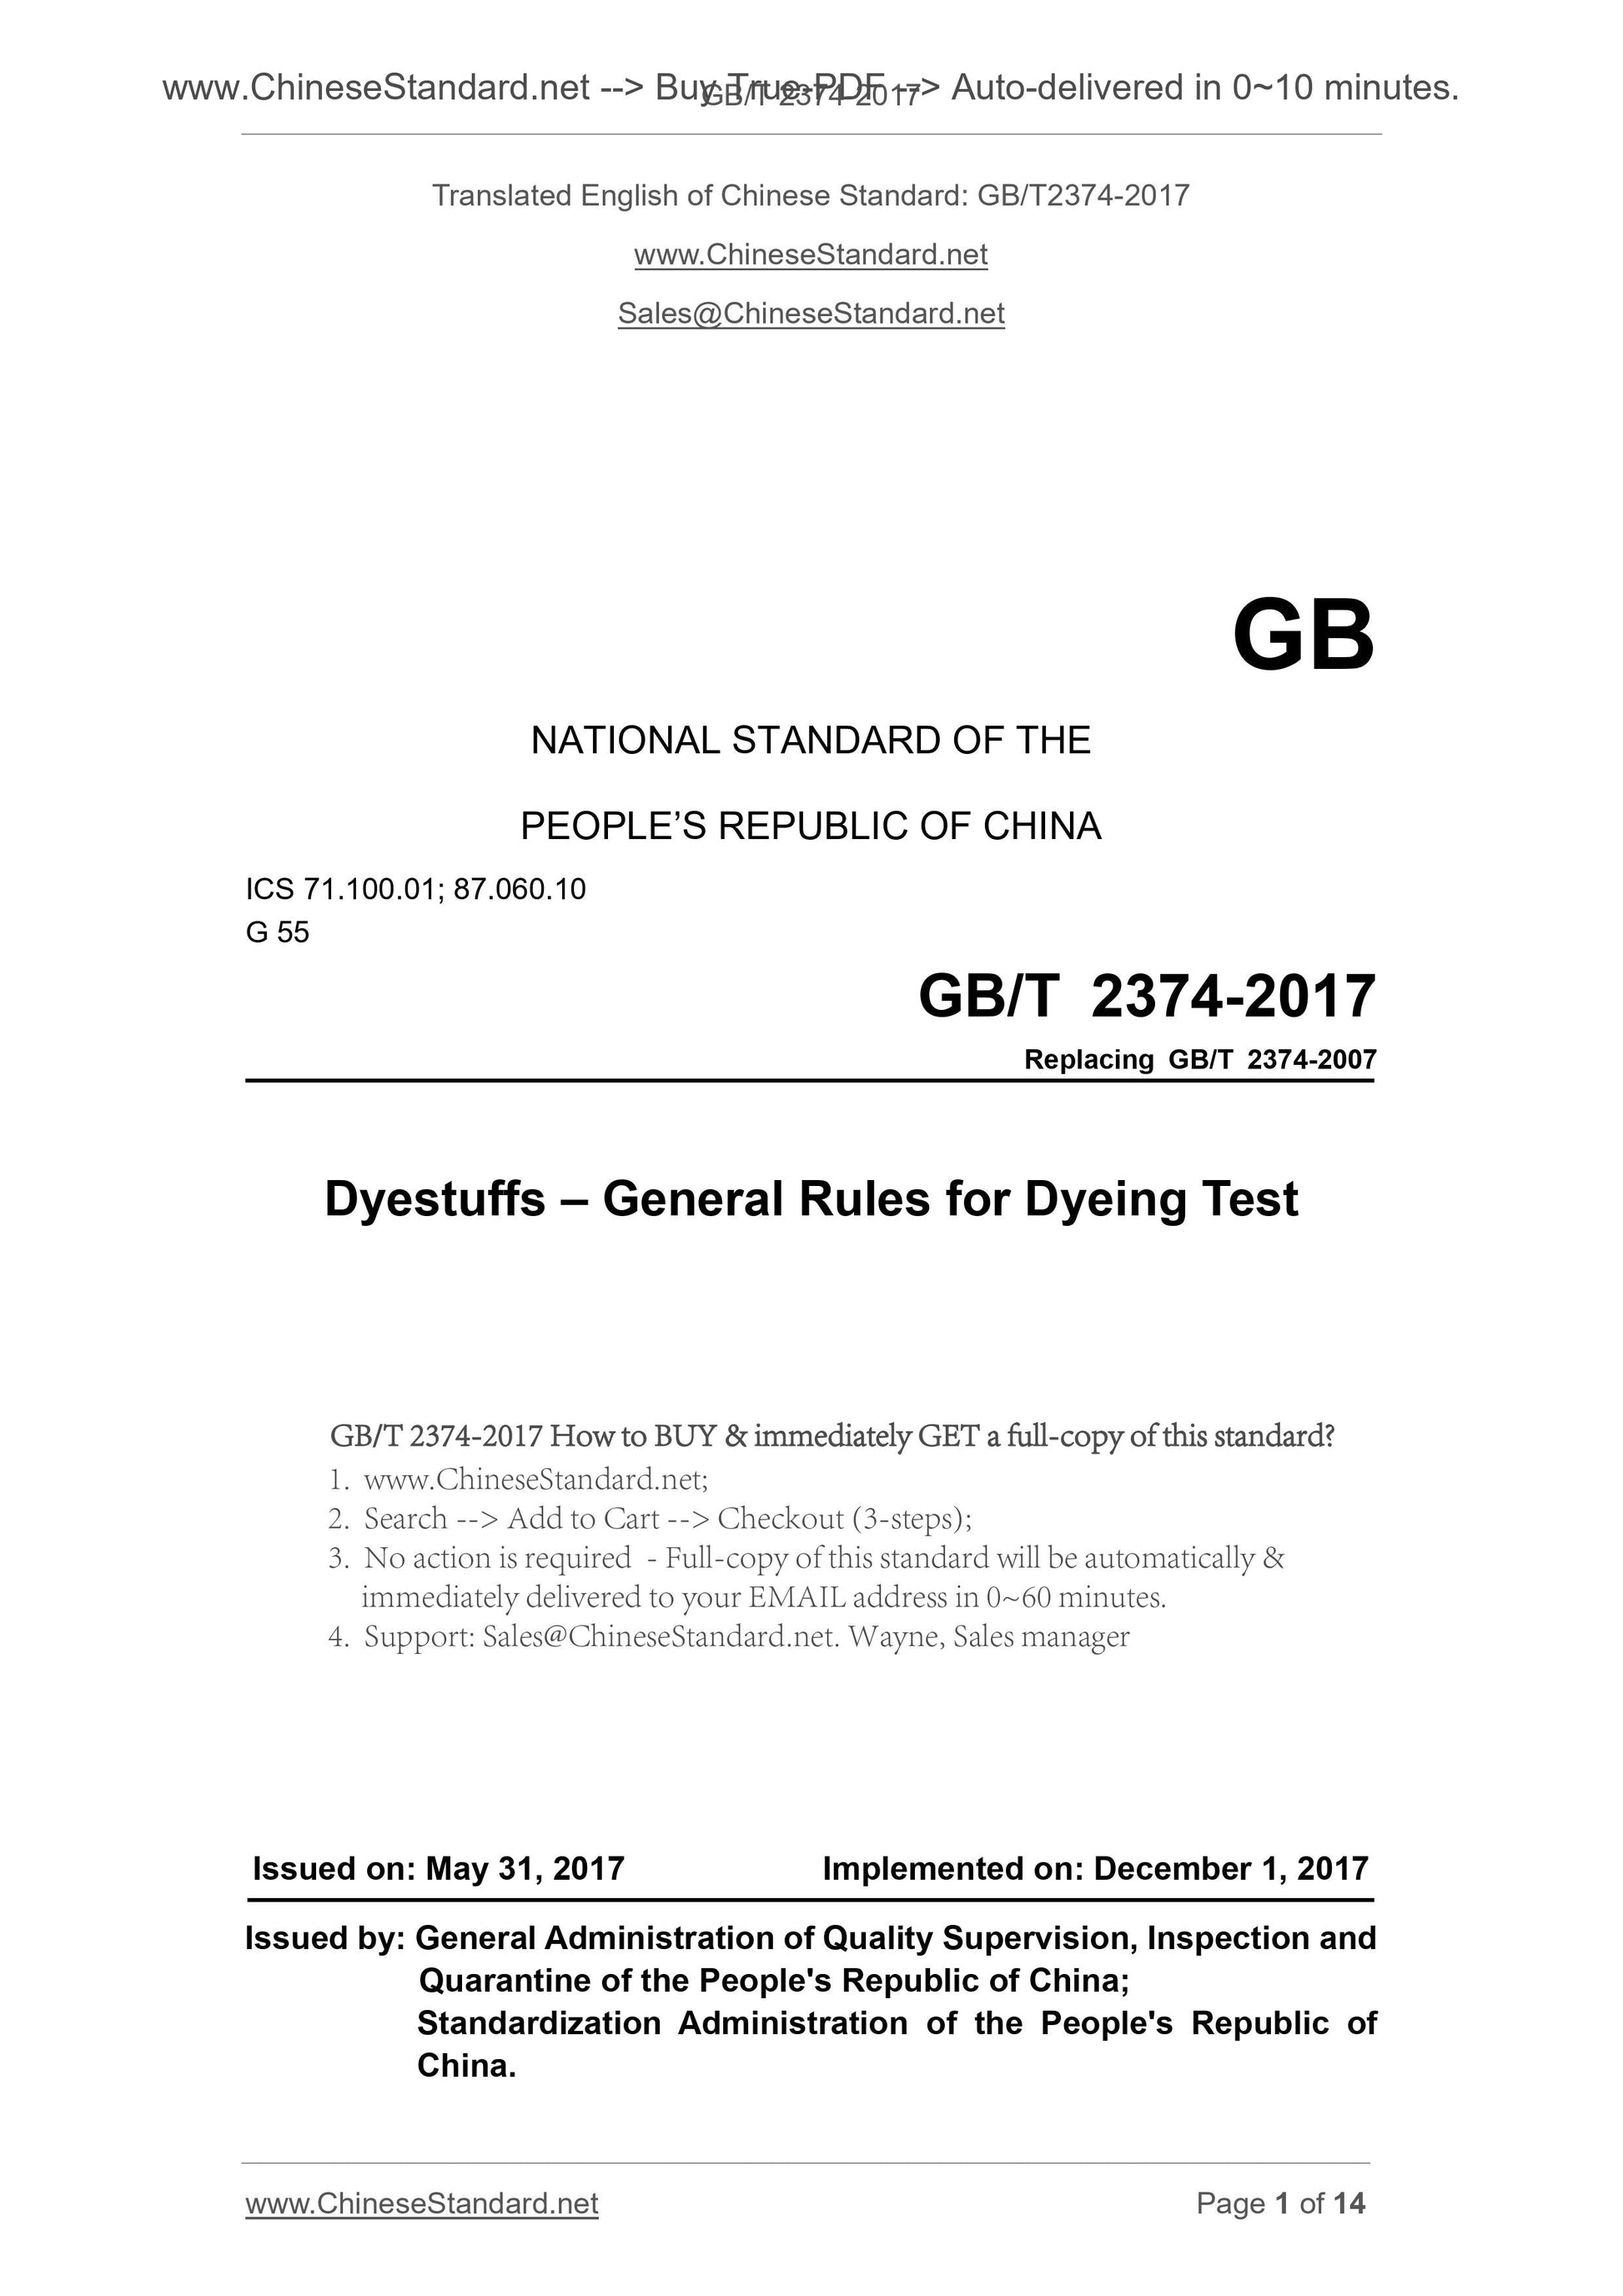 GB/T 2374-2017 Page 1